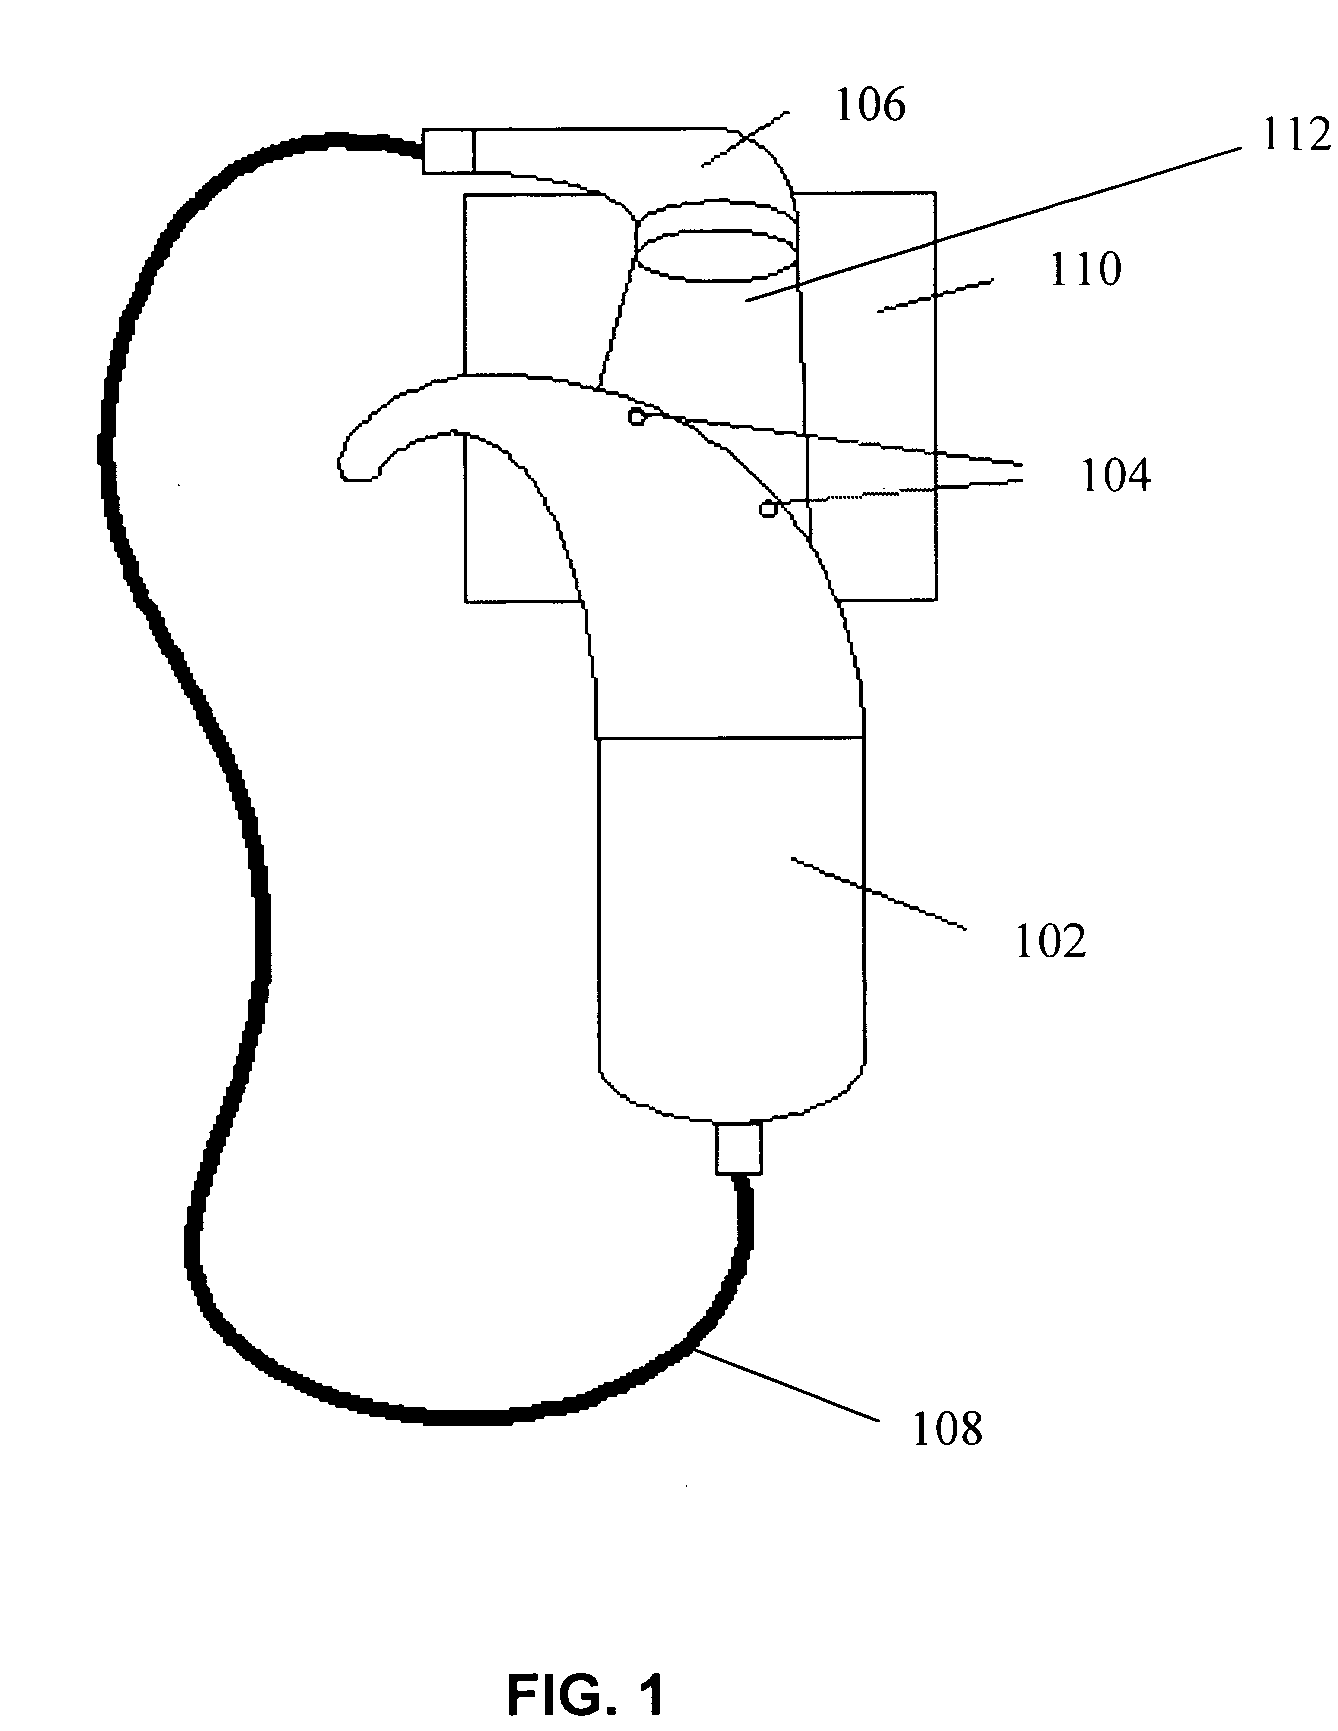 Stand-alone microphone test system for a hearing device